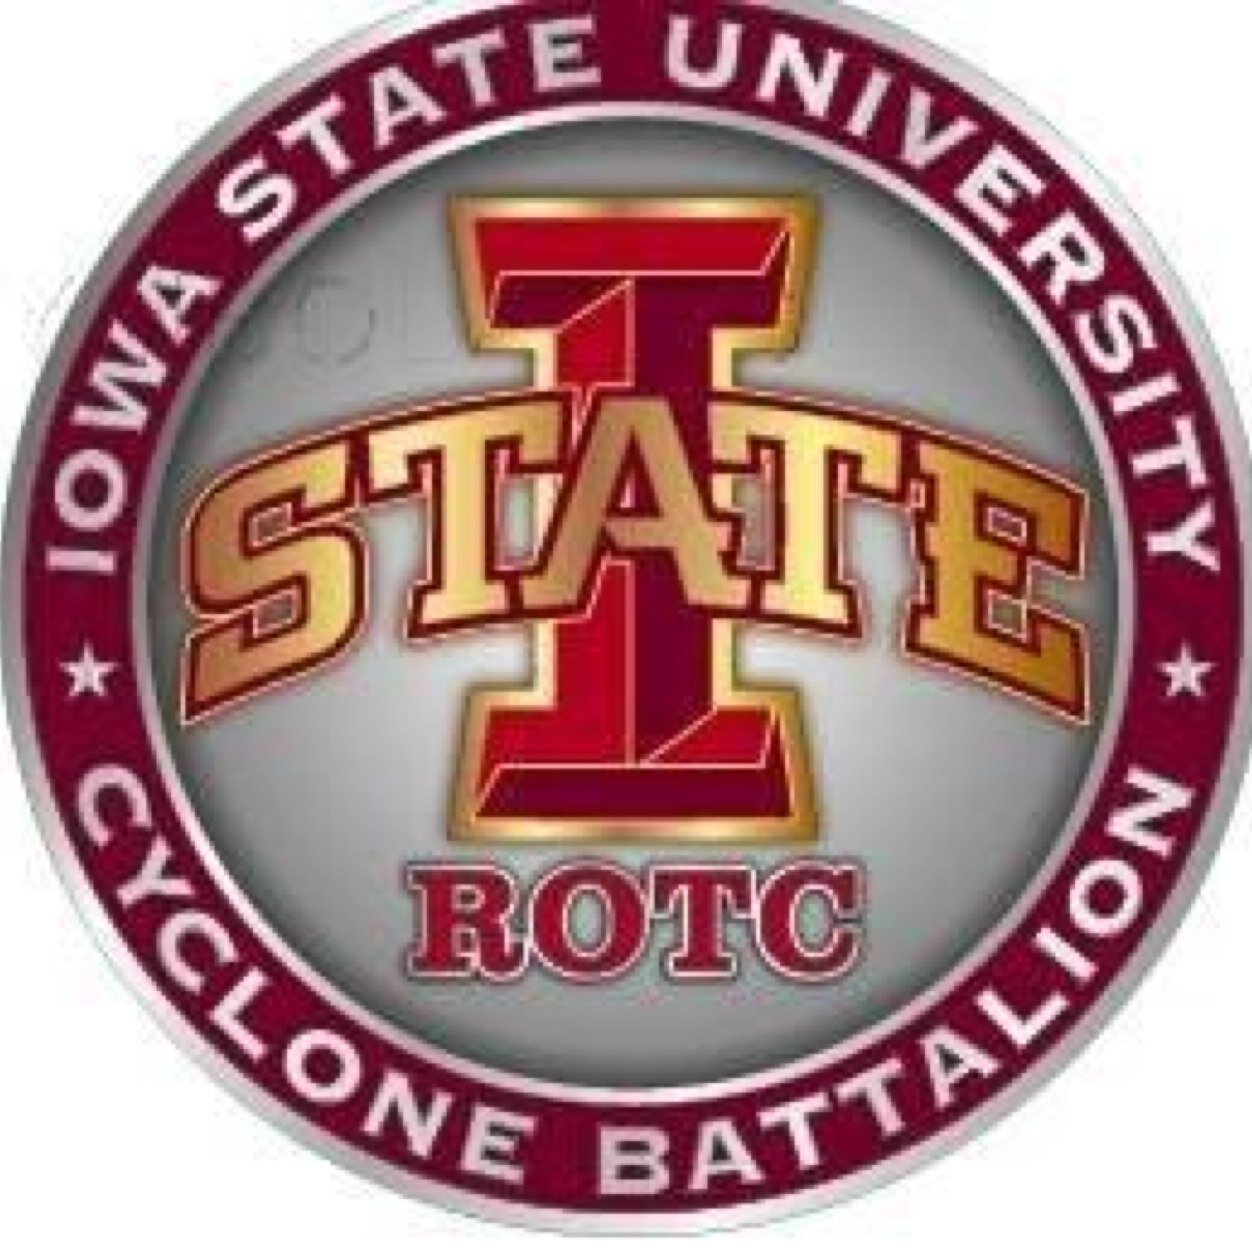 Official Cyclone Battalion Twitter: news and updates about our Cadets, as well as a place to connect with the Cyclone Battalion